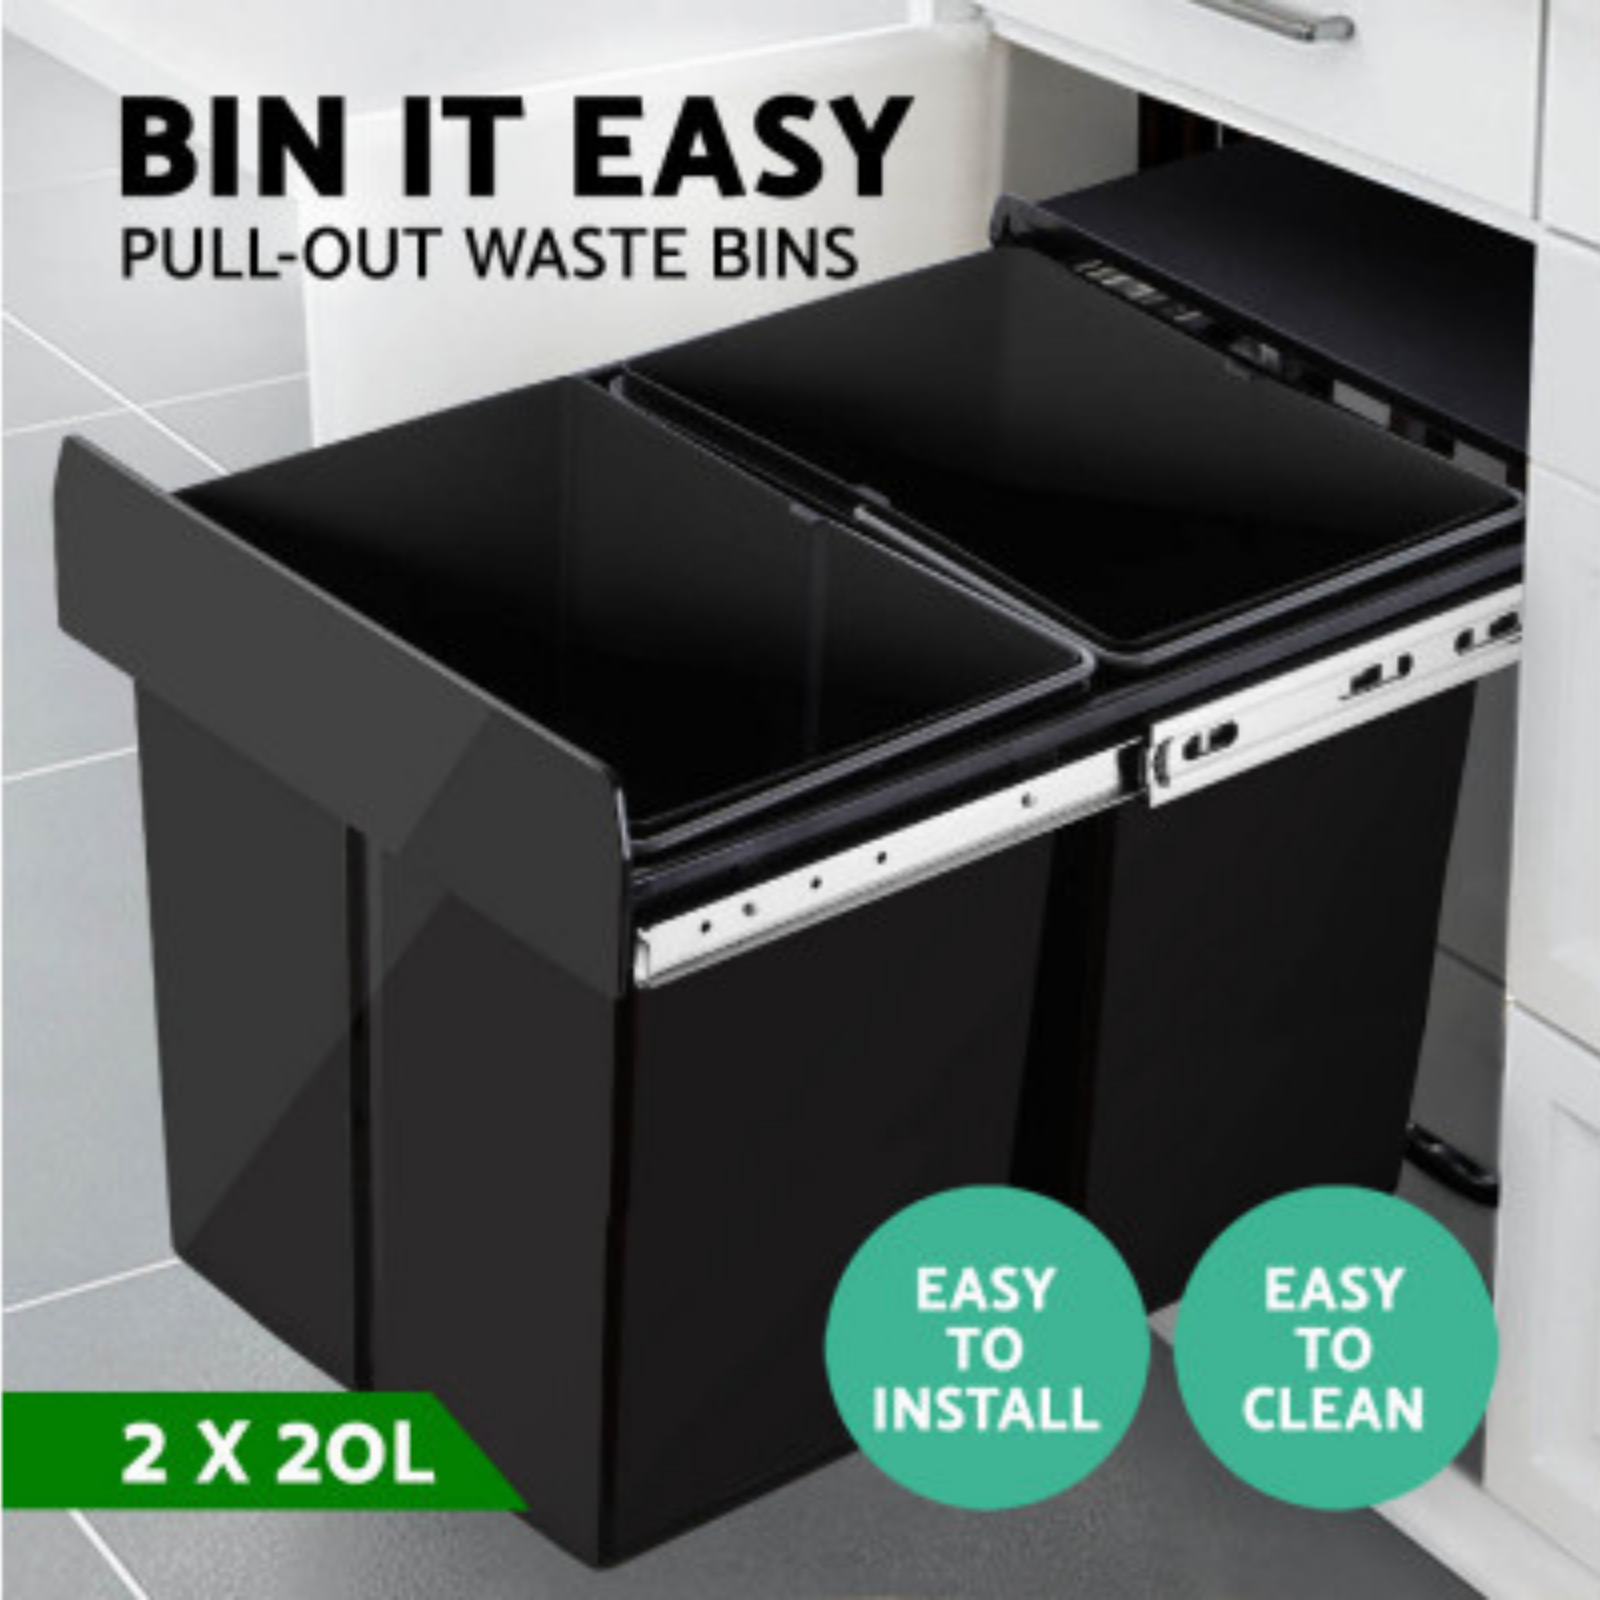 Cefito Dual Side Pull Out Bin will allow you to separate your waste from each other as well as from your recycling items